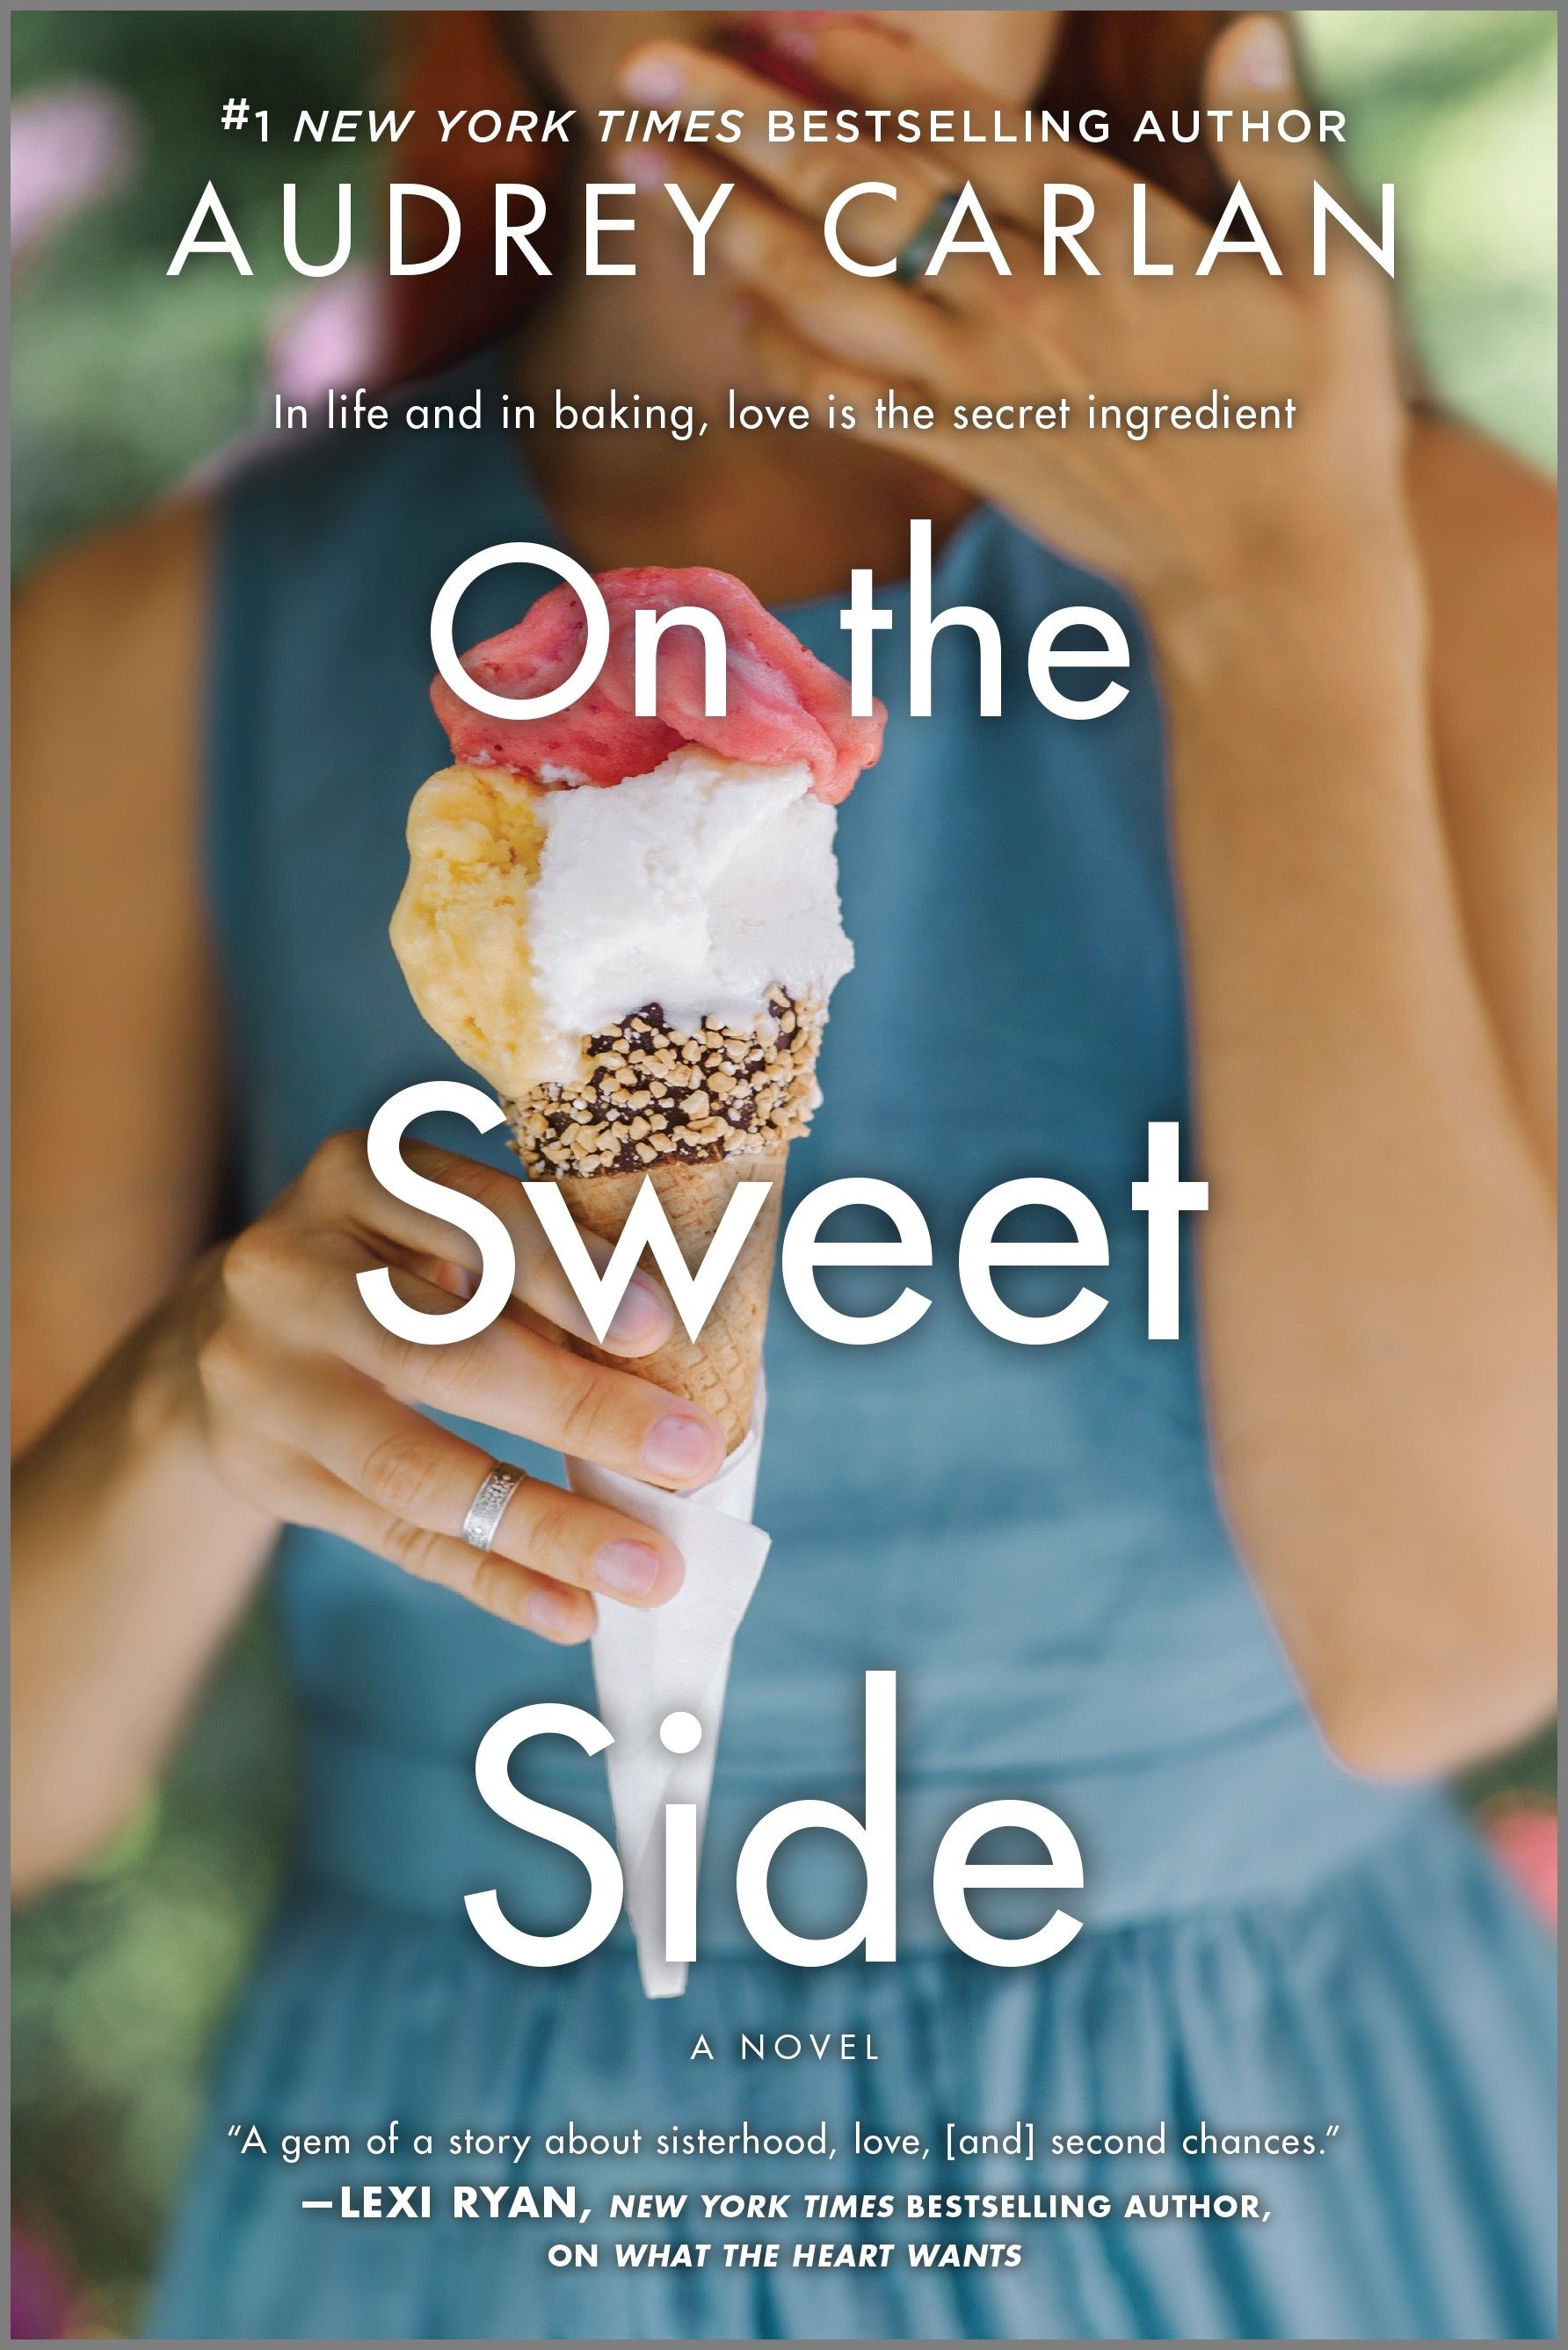 On the Sweet Side by Audrey Carlan